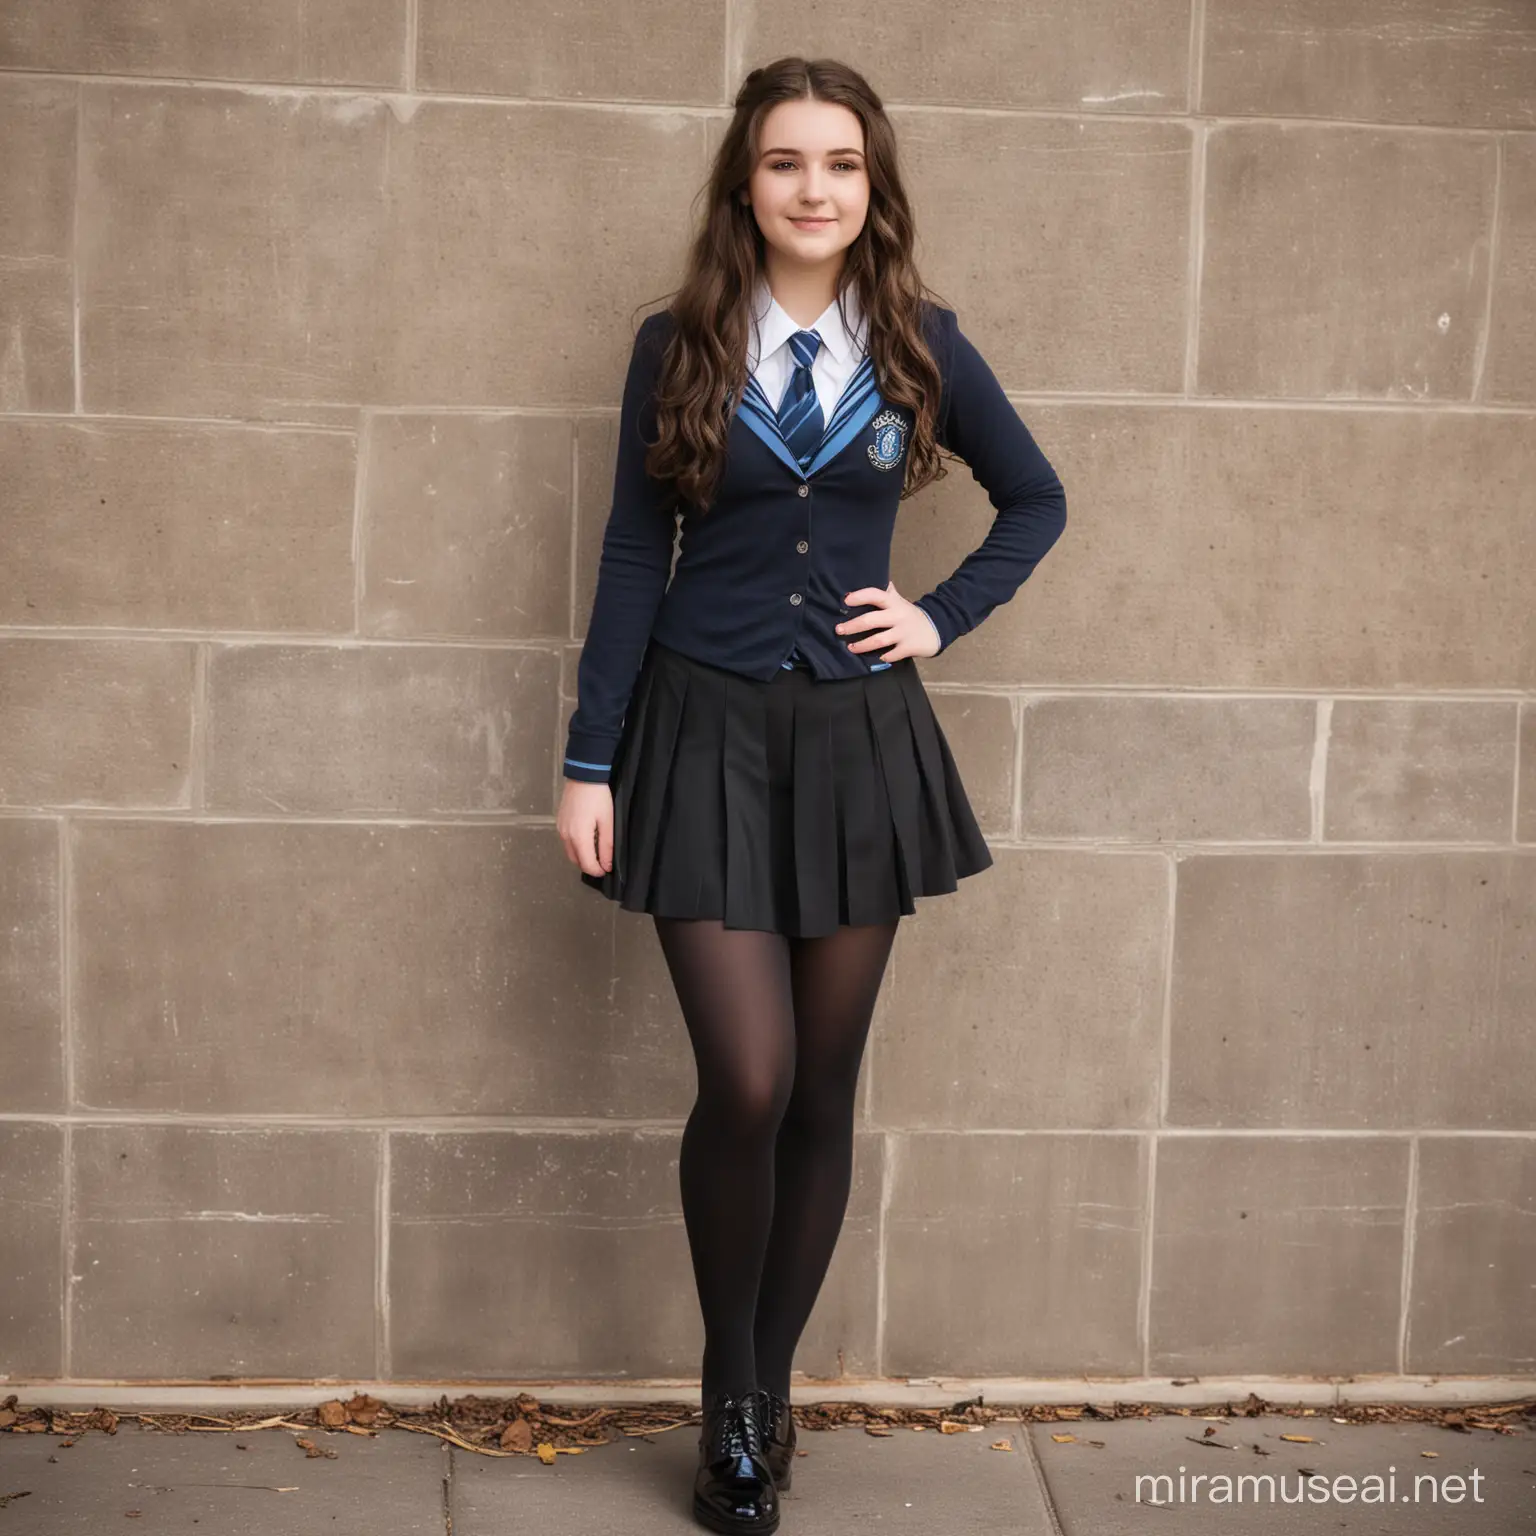 14 year old white girl with wavy mid length dark brown hair, very large boobs, wearing hogwarts uniform girl ravenclaw, black full length tights, black shoes